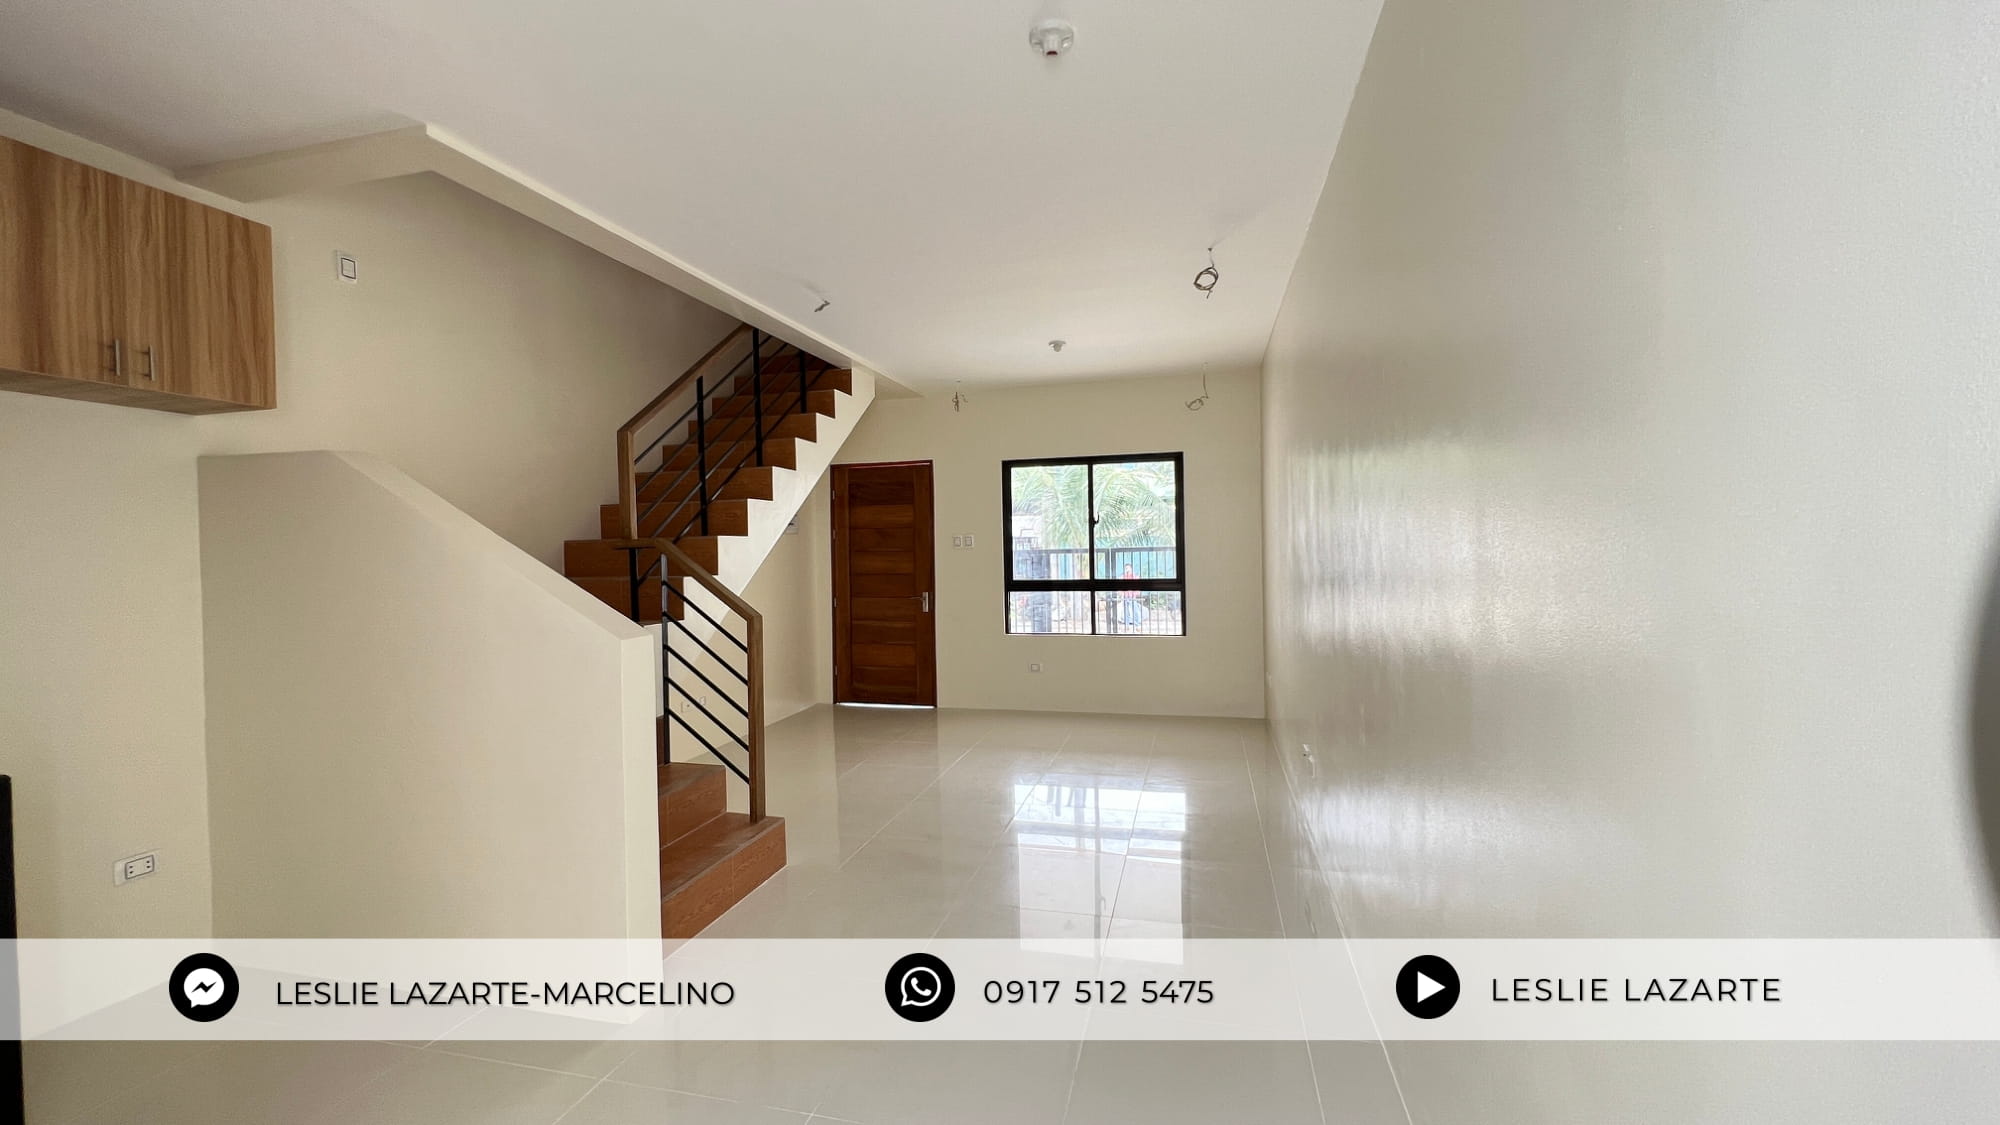 Photo of Kathleen Place 5 - Inner Unit | Modern House and Lot for Sale Gawaran Bacoor Cavite | Jeika Properties Corporation